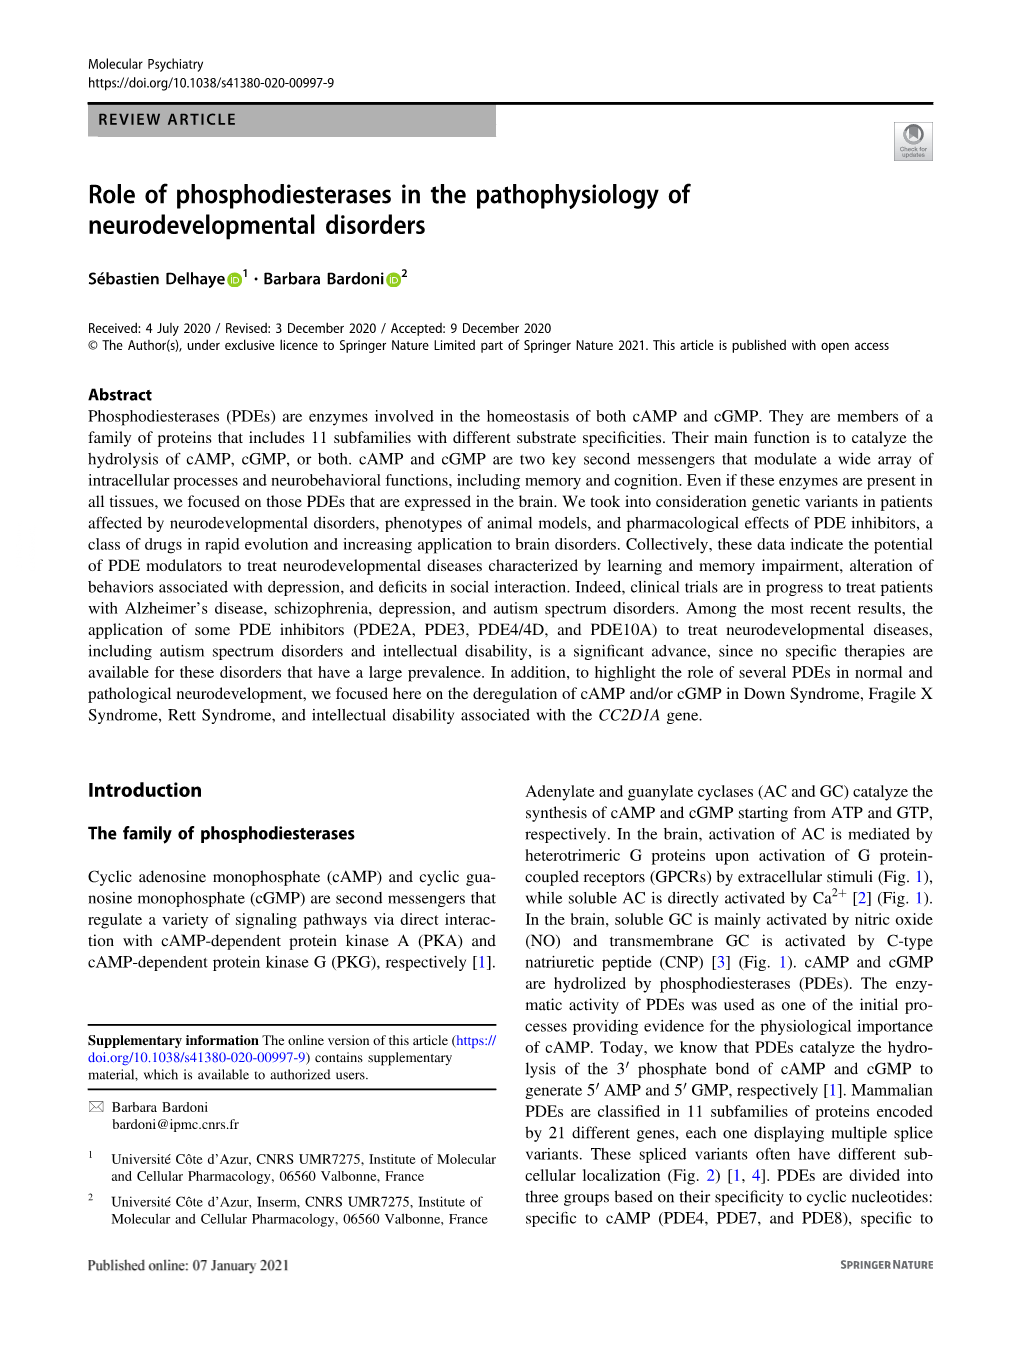 Role of Phosphodiesterases in the Pathophysiology of Neurodevelopmental Disorders